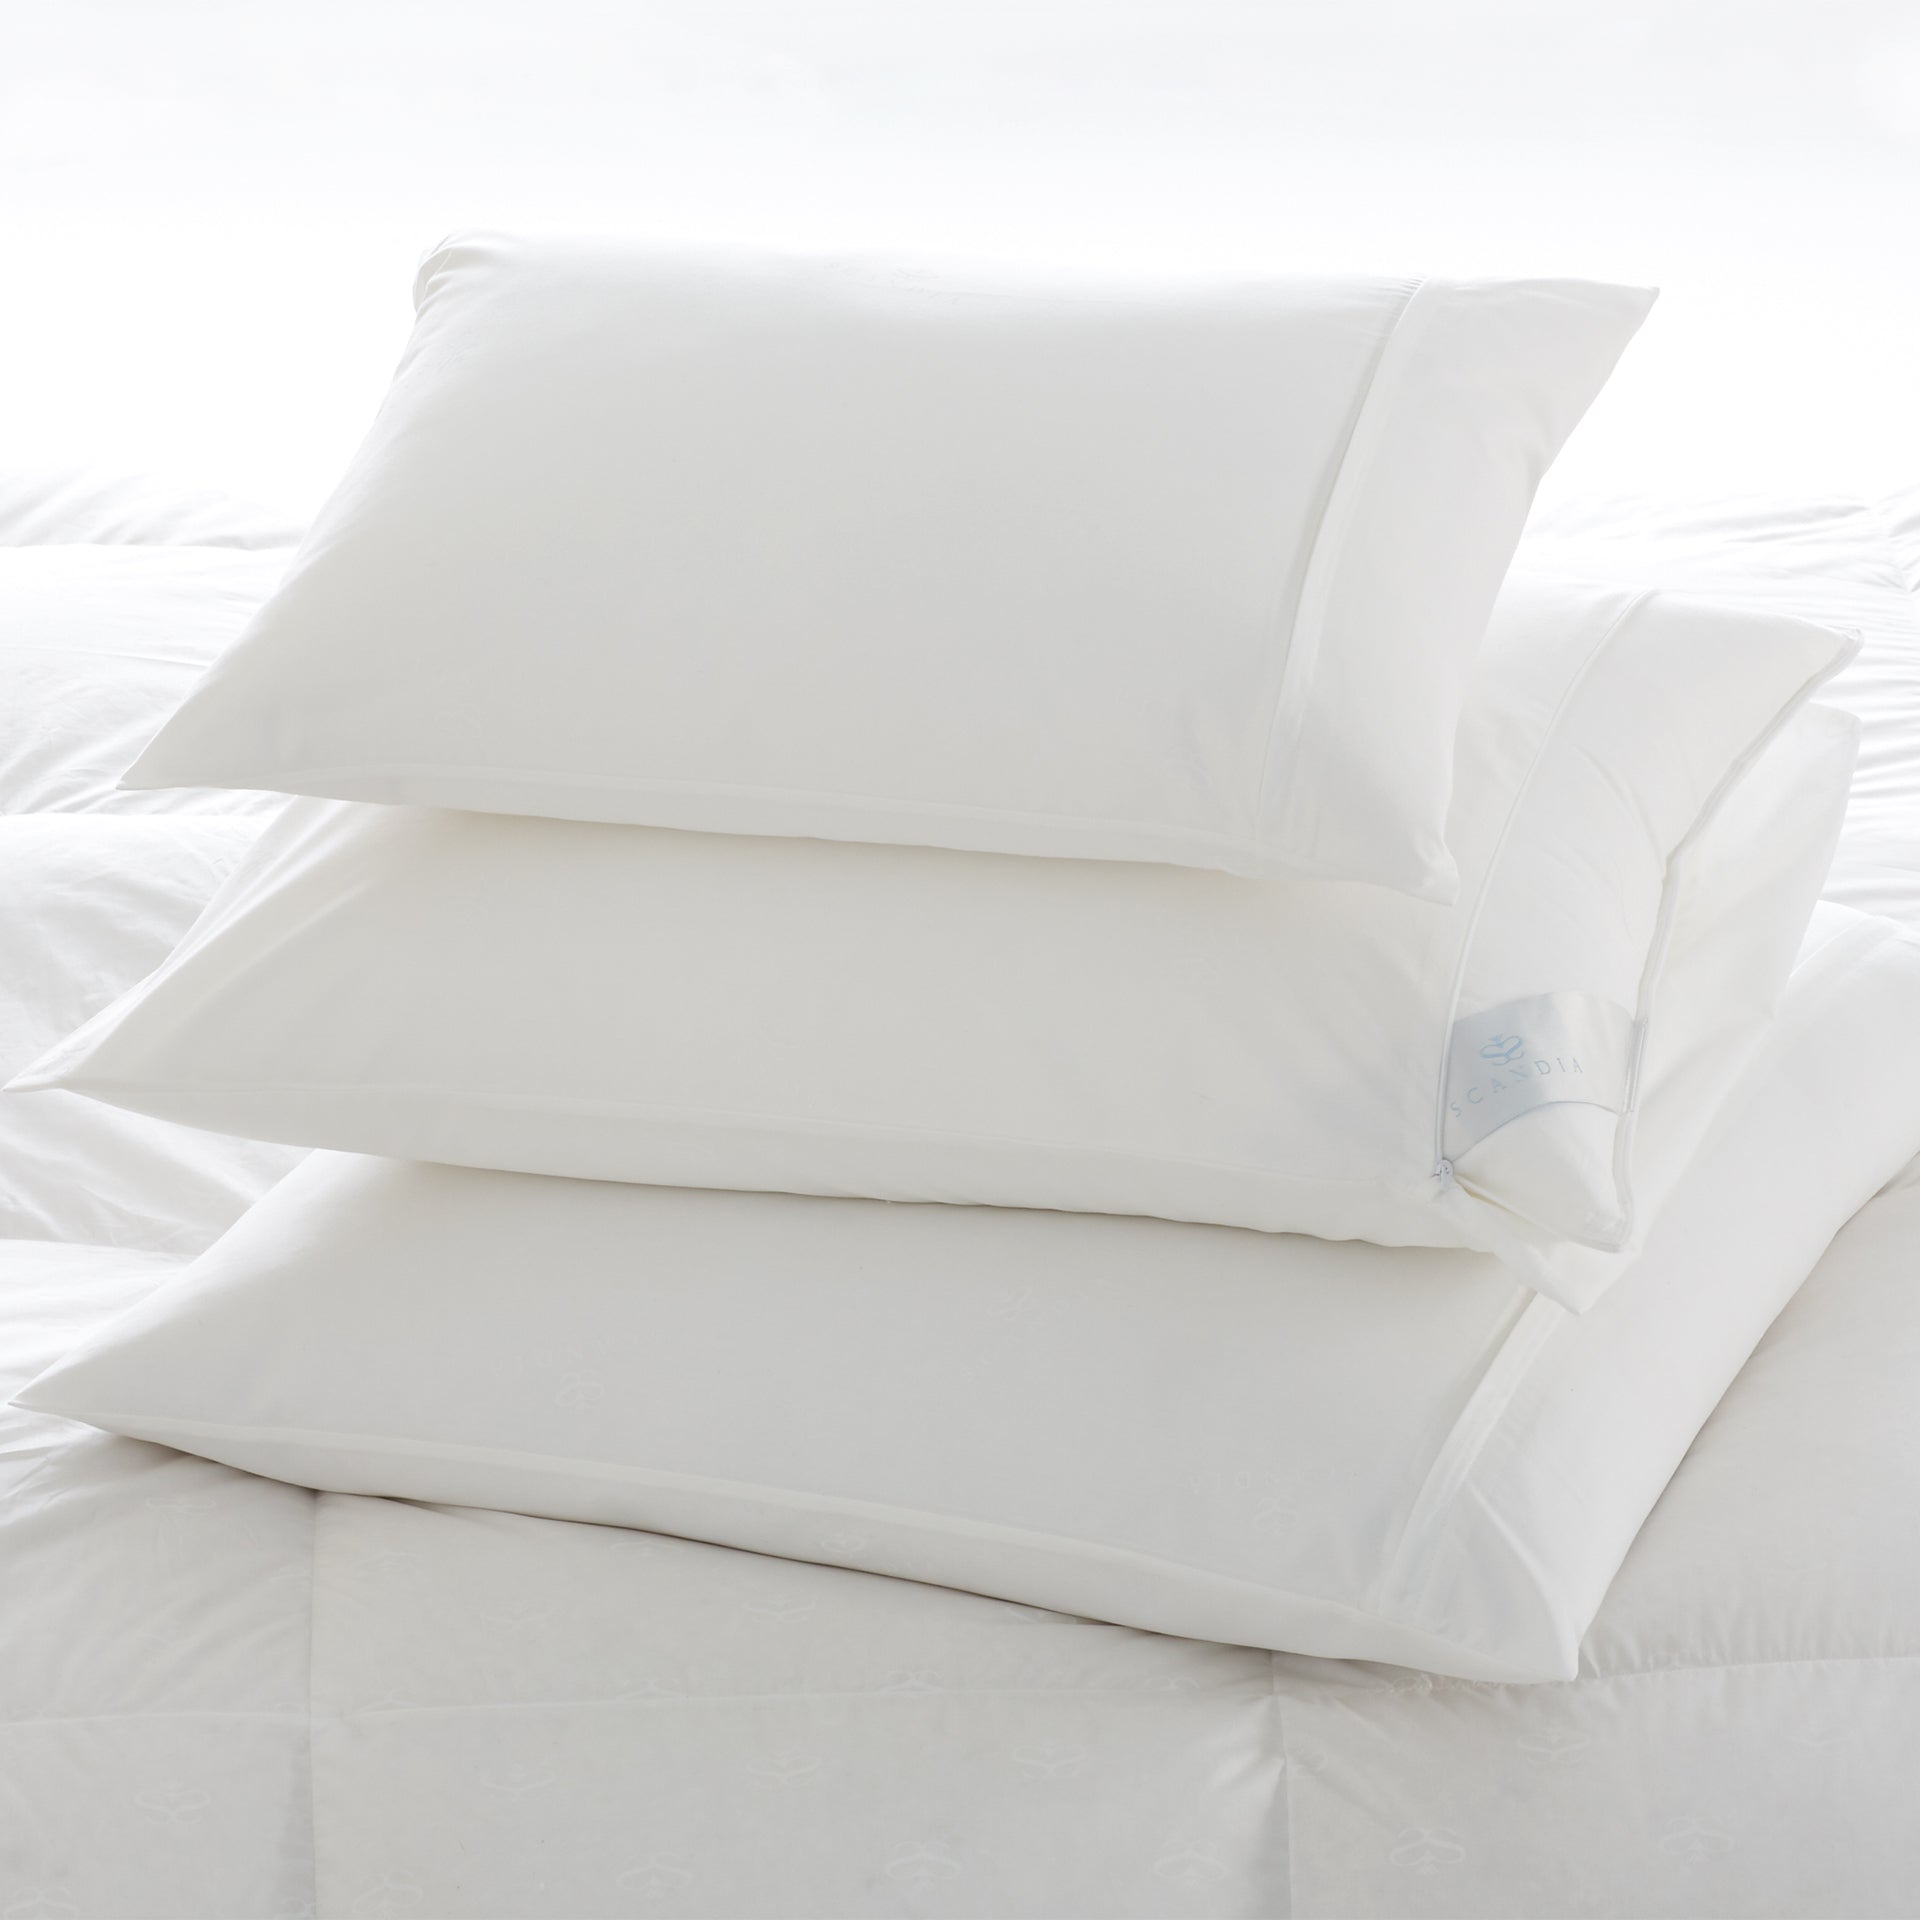 Protect your new featherbed with our 200 thread count cotton protector 